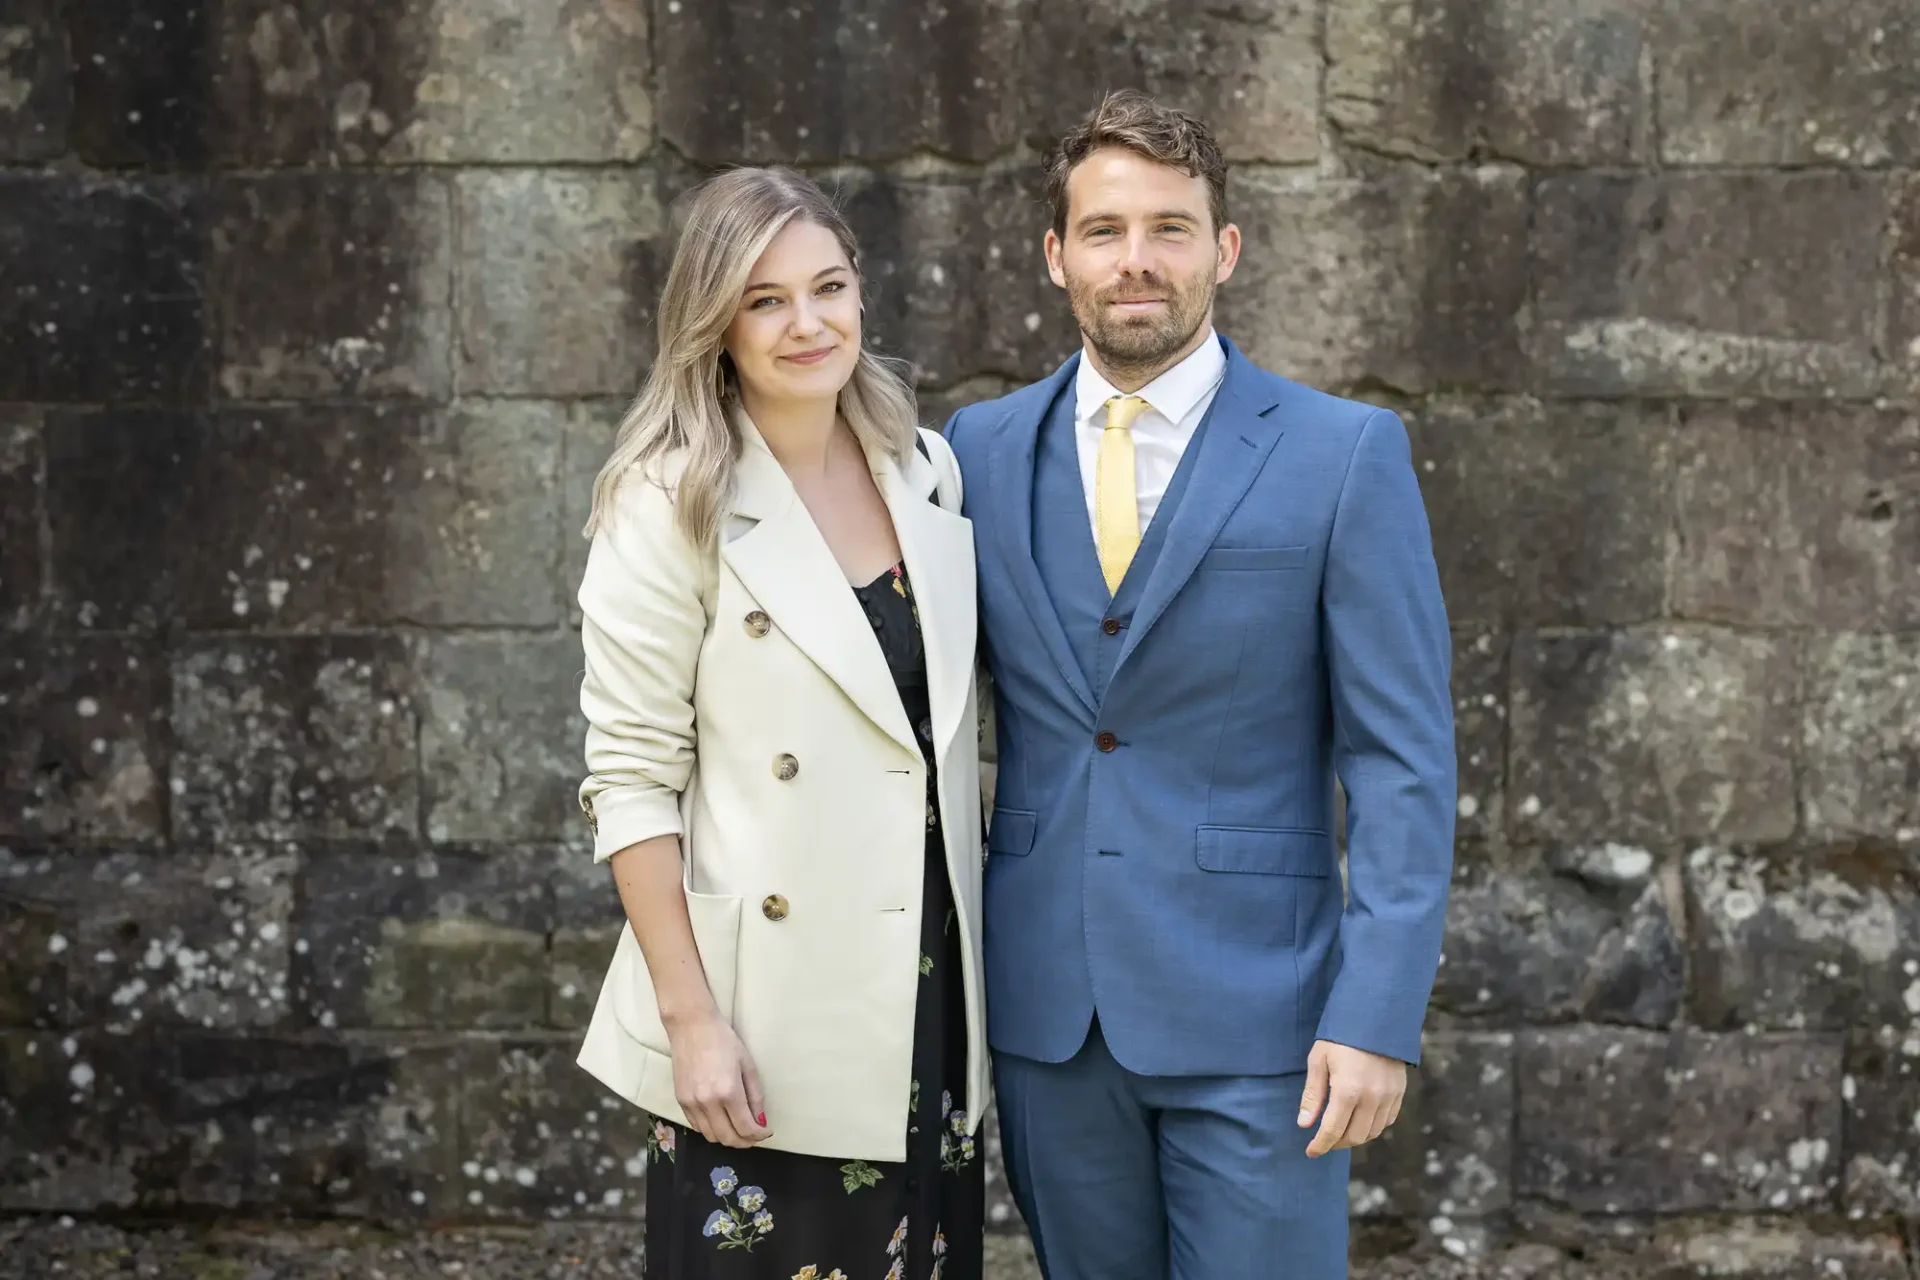 A man in a blue suit and yellow tie and a woman in a cream blazer and floral dress standing together in front of a stone wall.